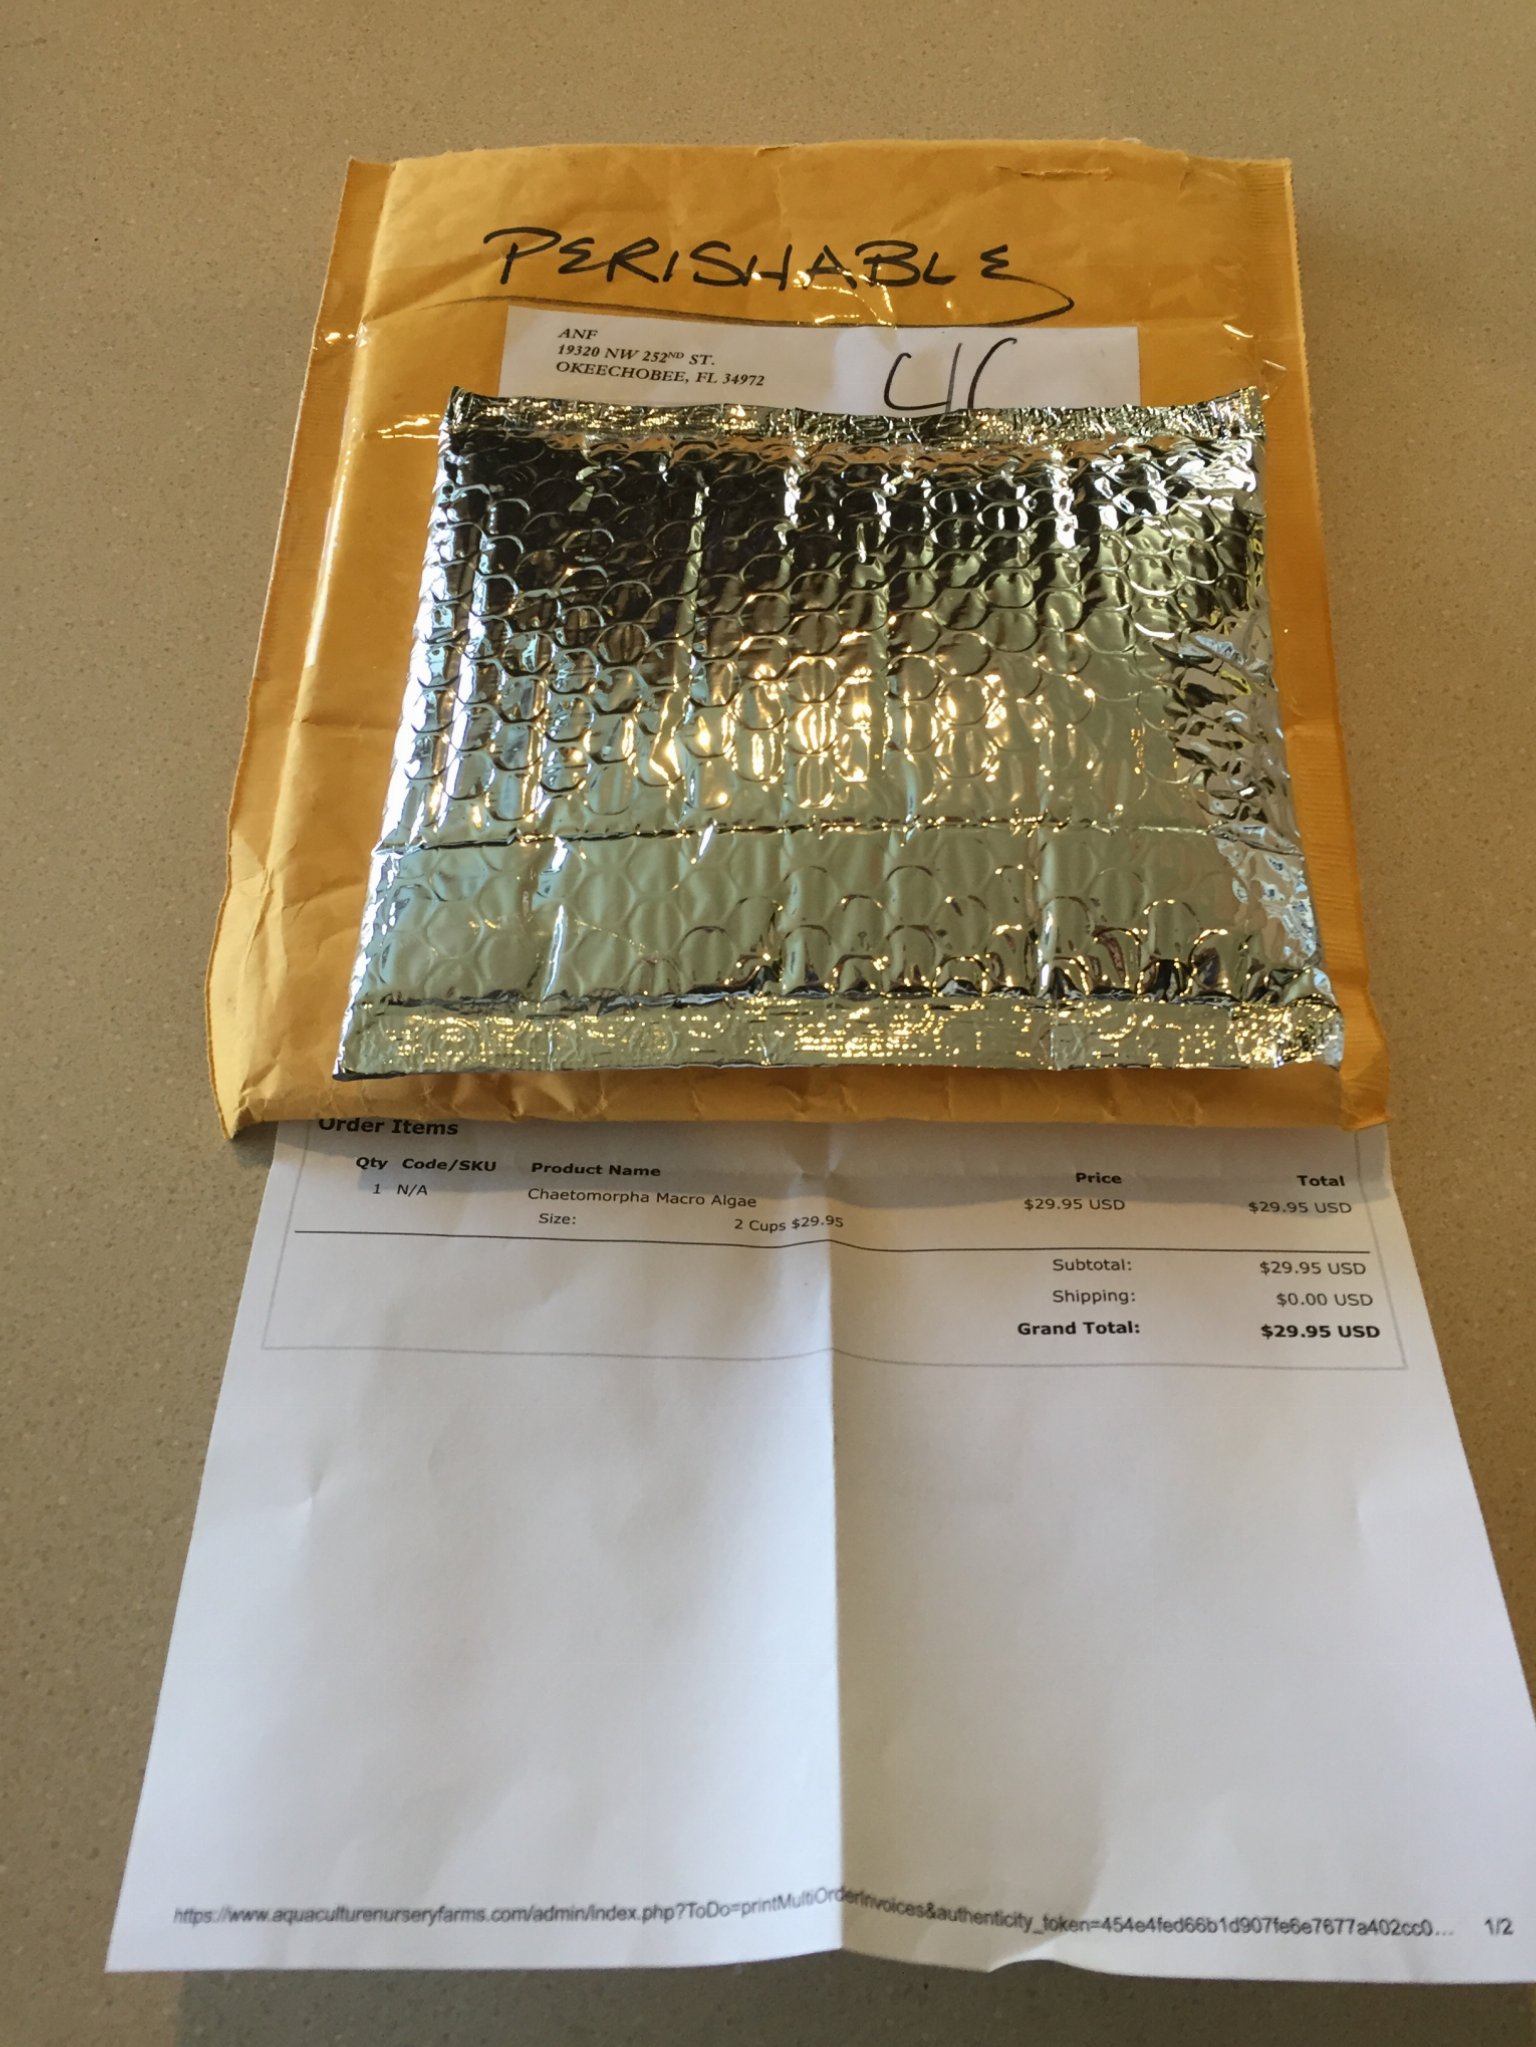 Rusalty Envelope with packet inside